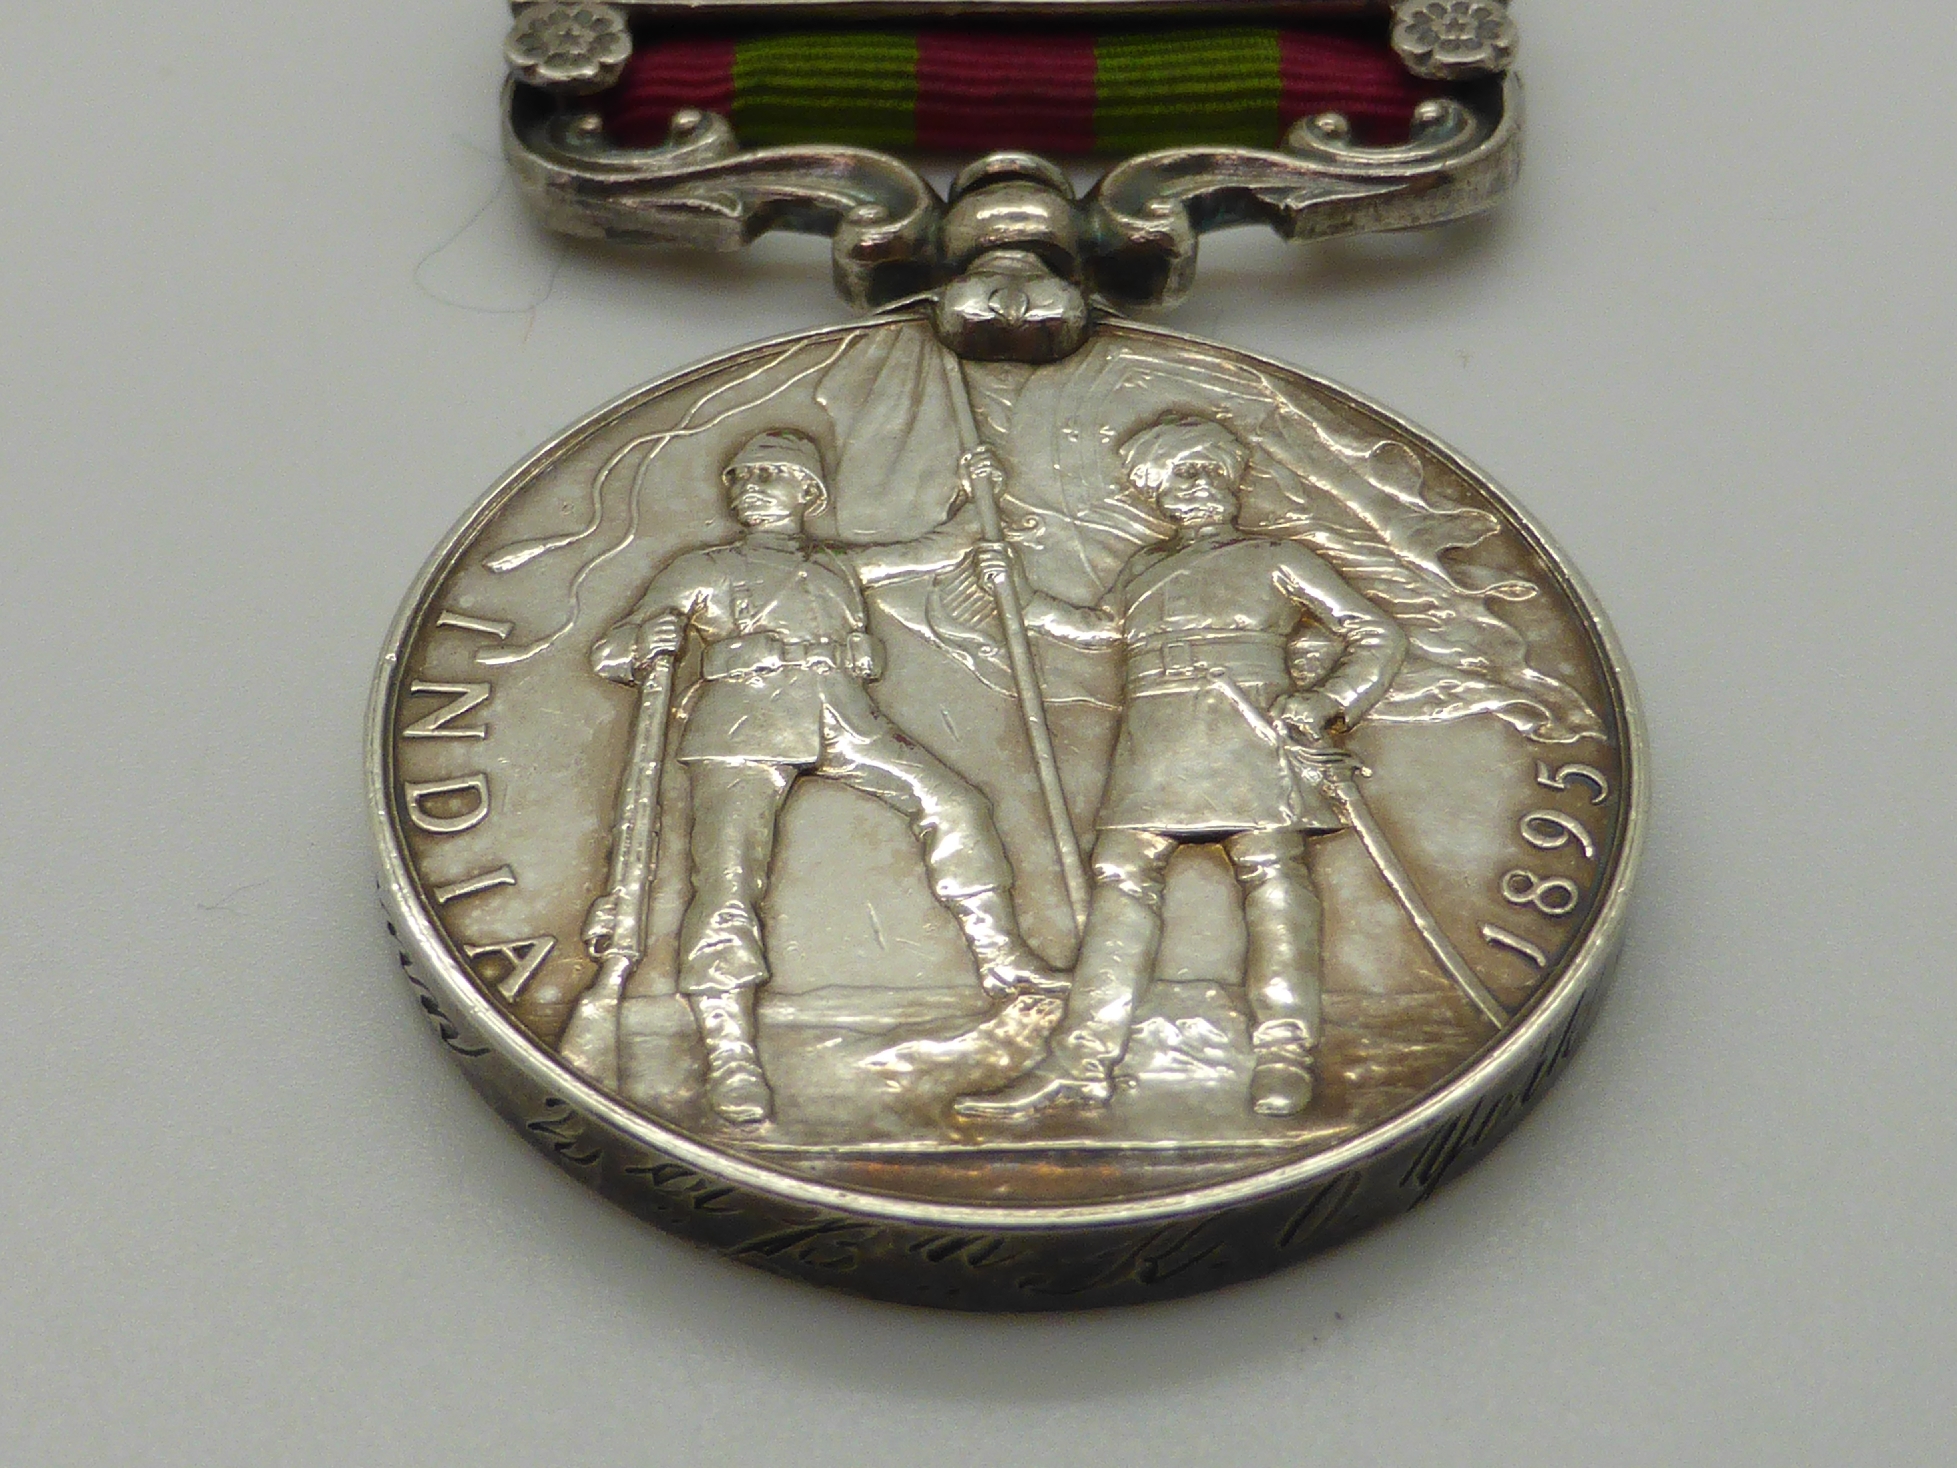 Victorian British Army Indian Medal with Punjab Frontier 1897-98 clasp named to 5361 Pvt. J. Dunn - Image 5 of 8